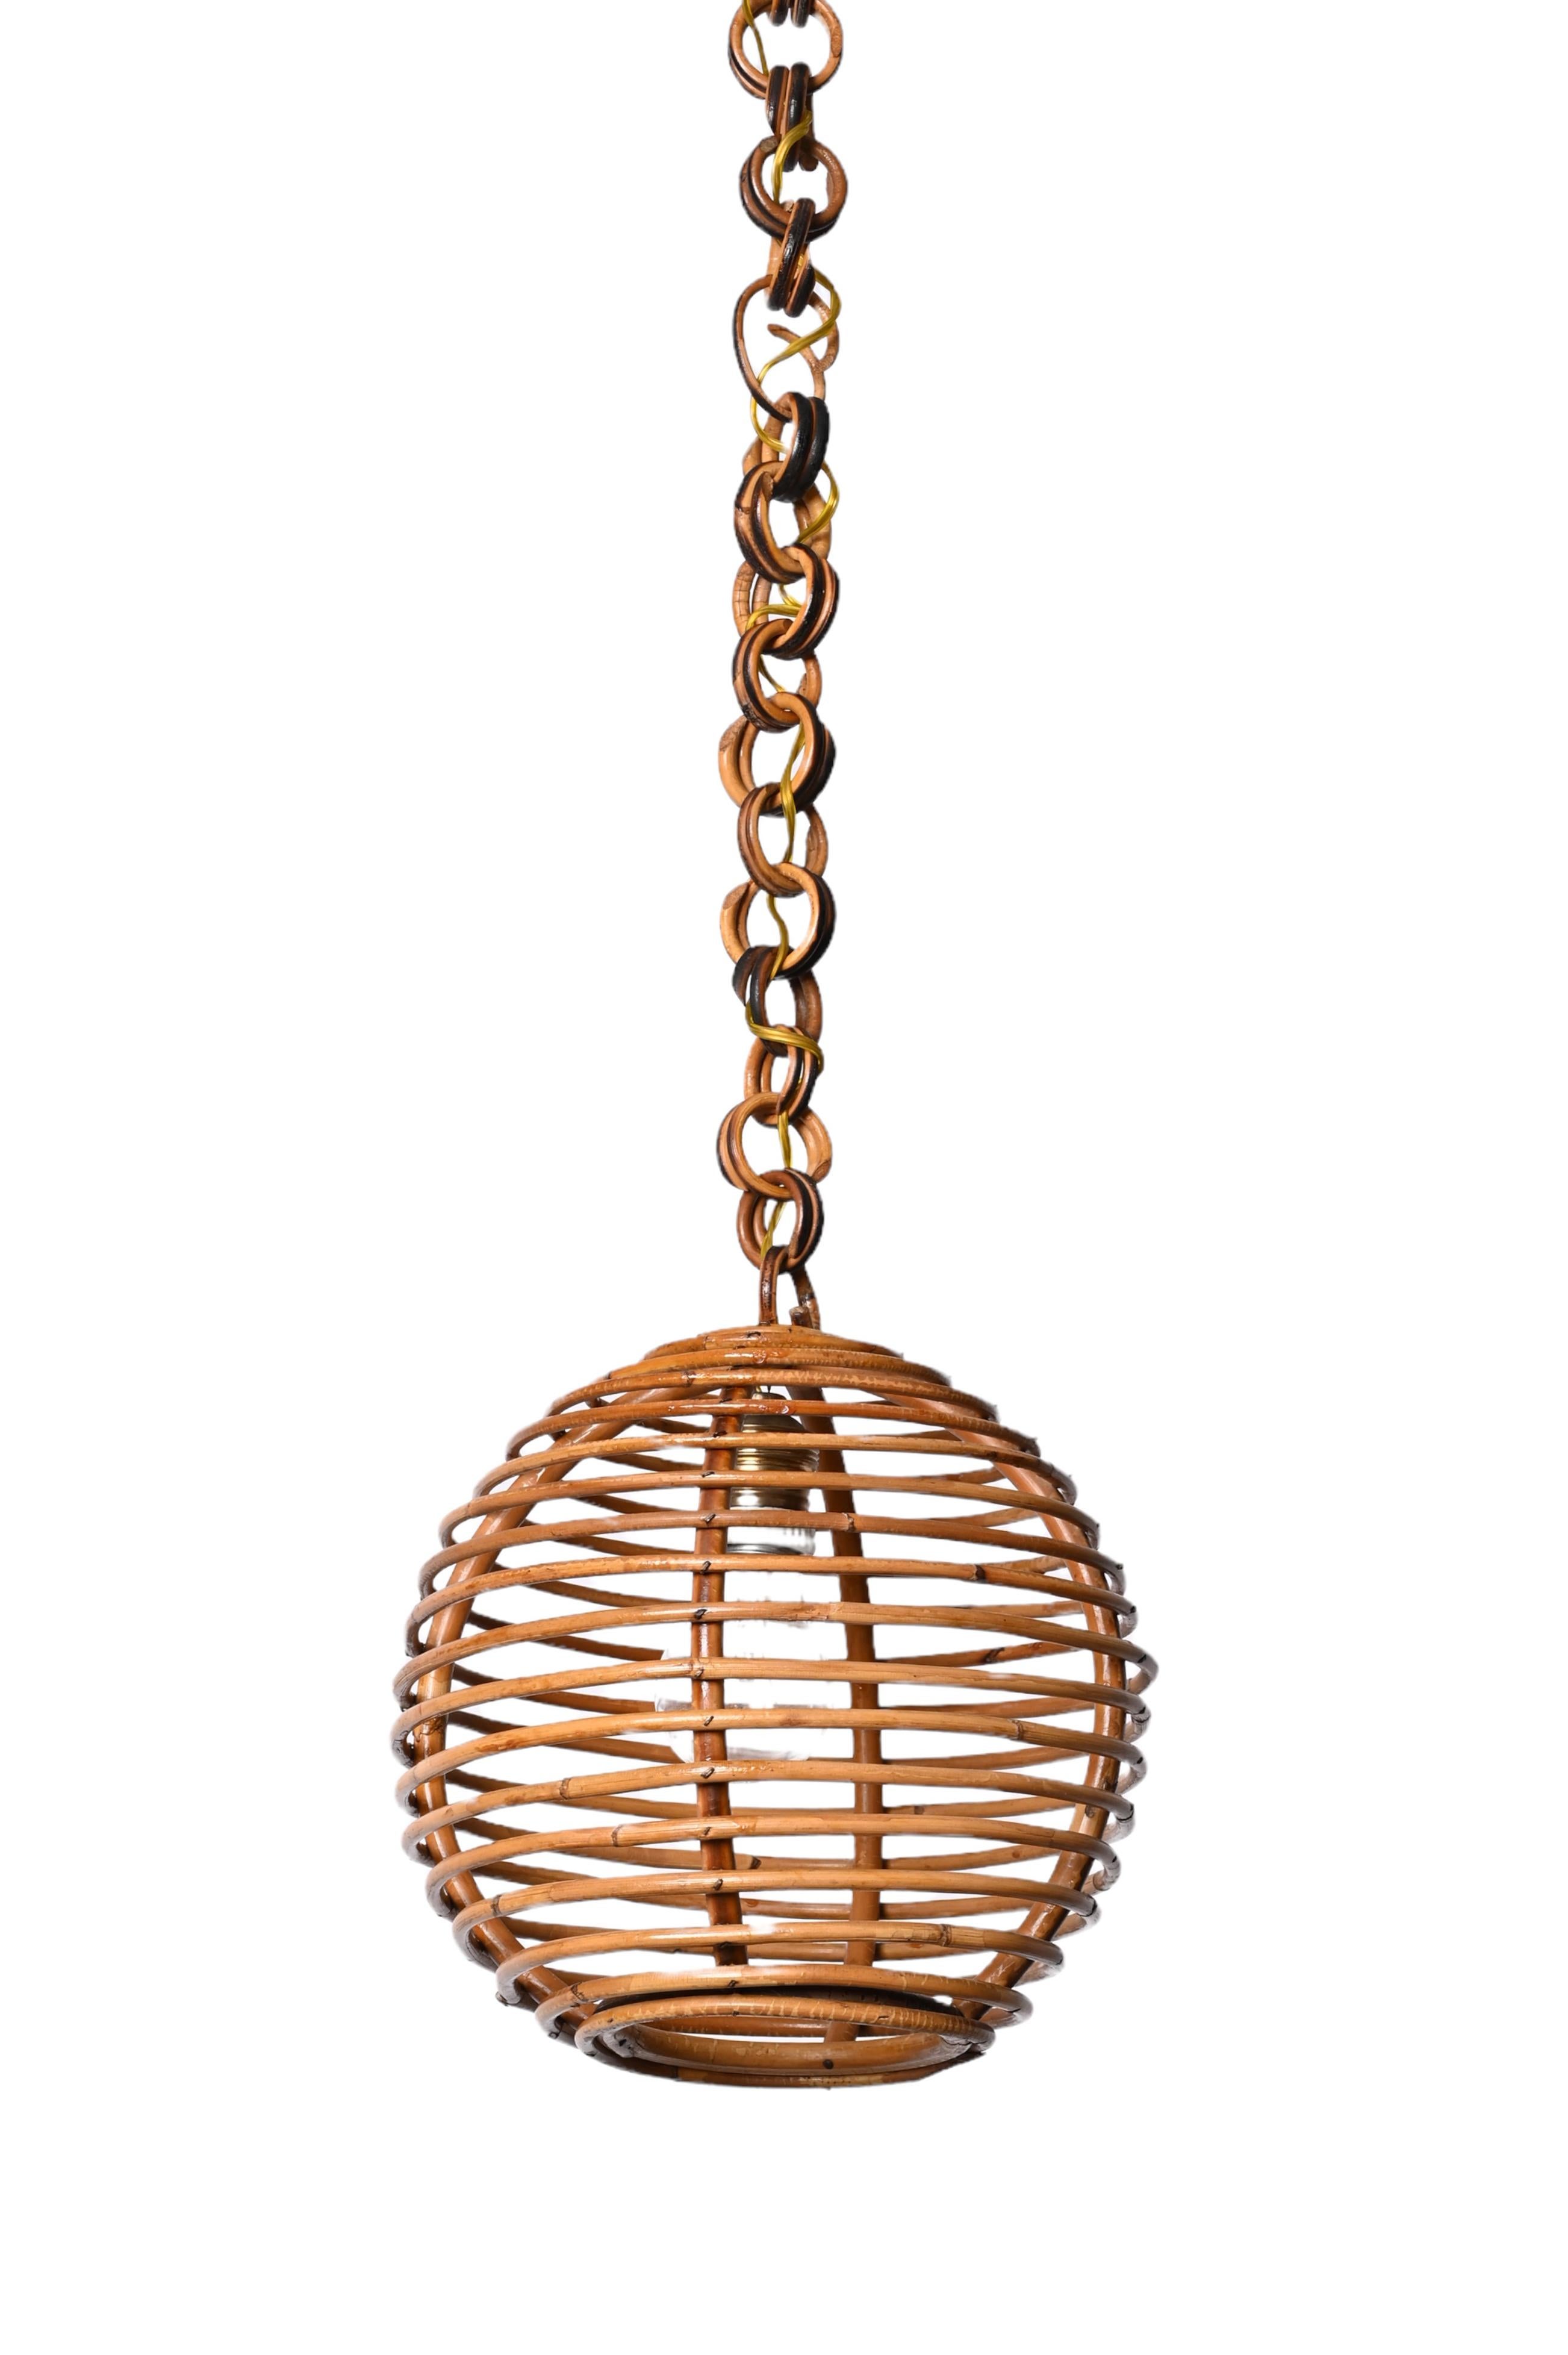 20th Century Midcentury French Riviera Bambo and Rattan Spherical Italian Chandelier, 1960s For Sale